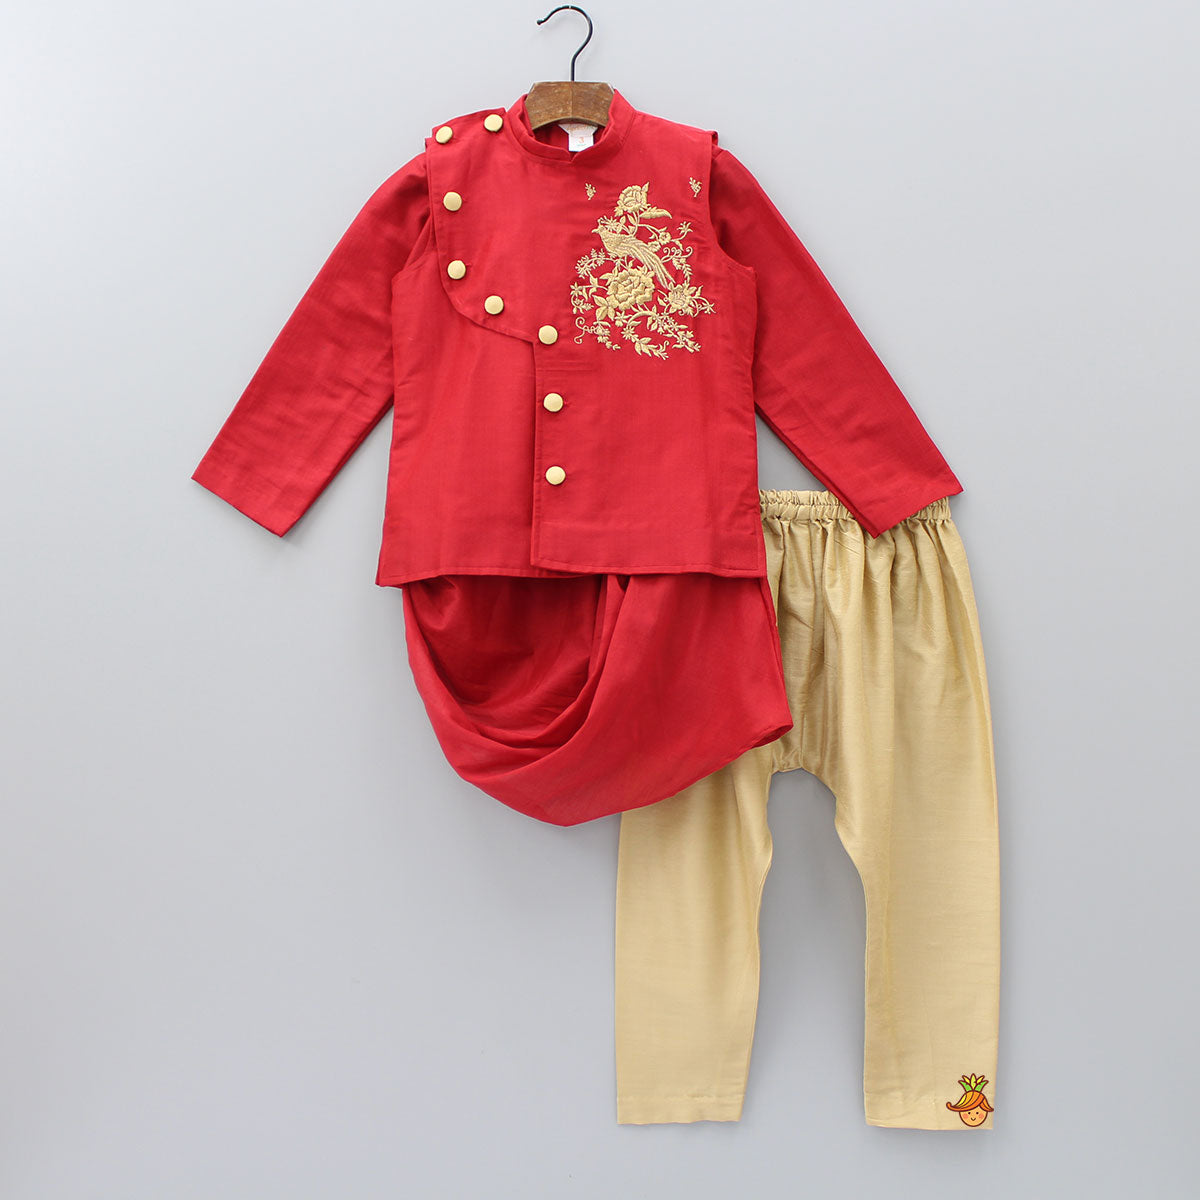 Red Cowl Style Kurta And Beige Pyjama With Embroidered Jacket